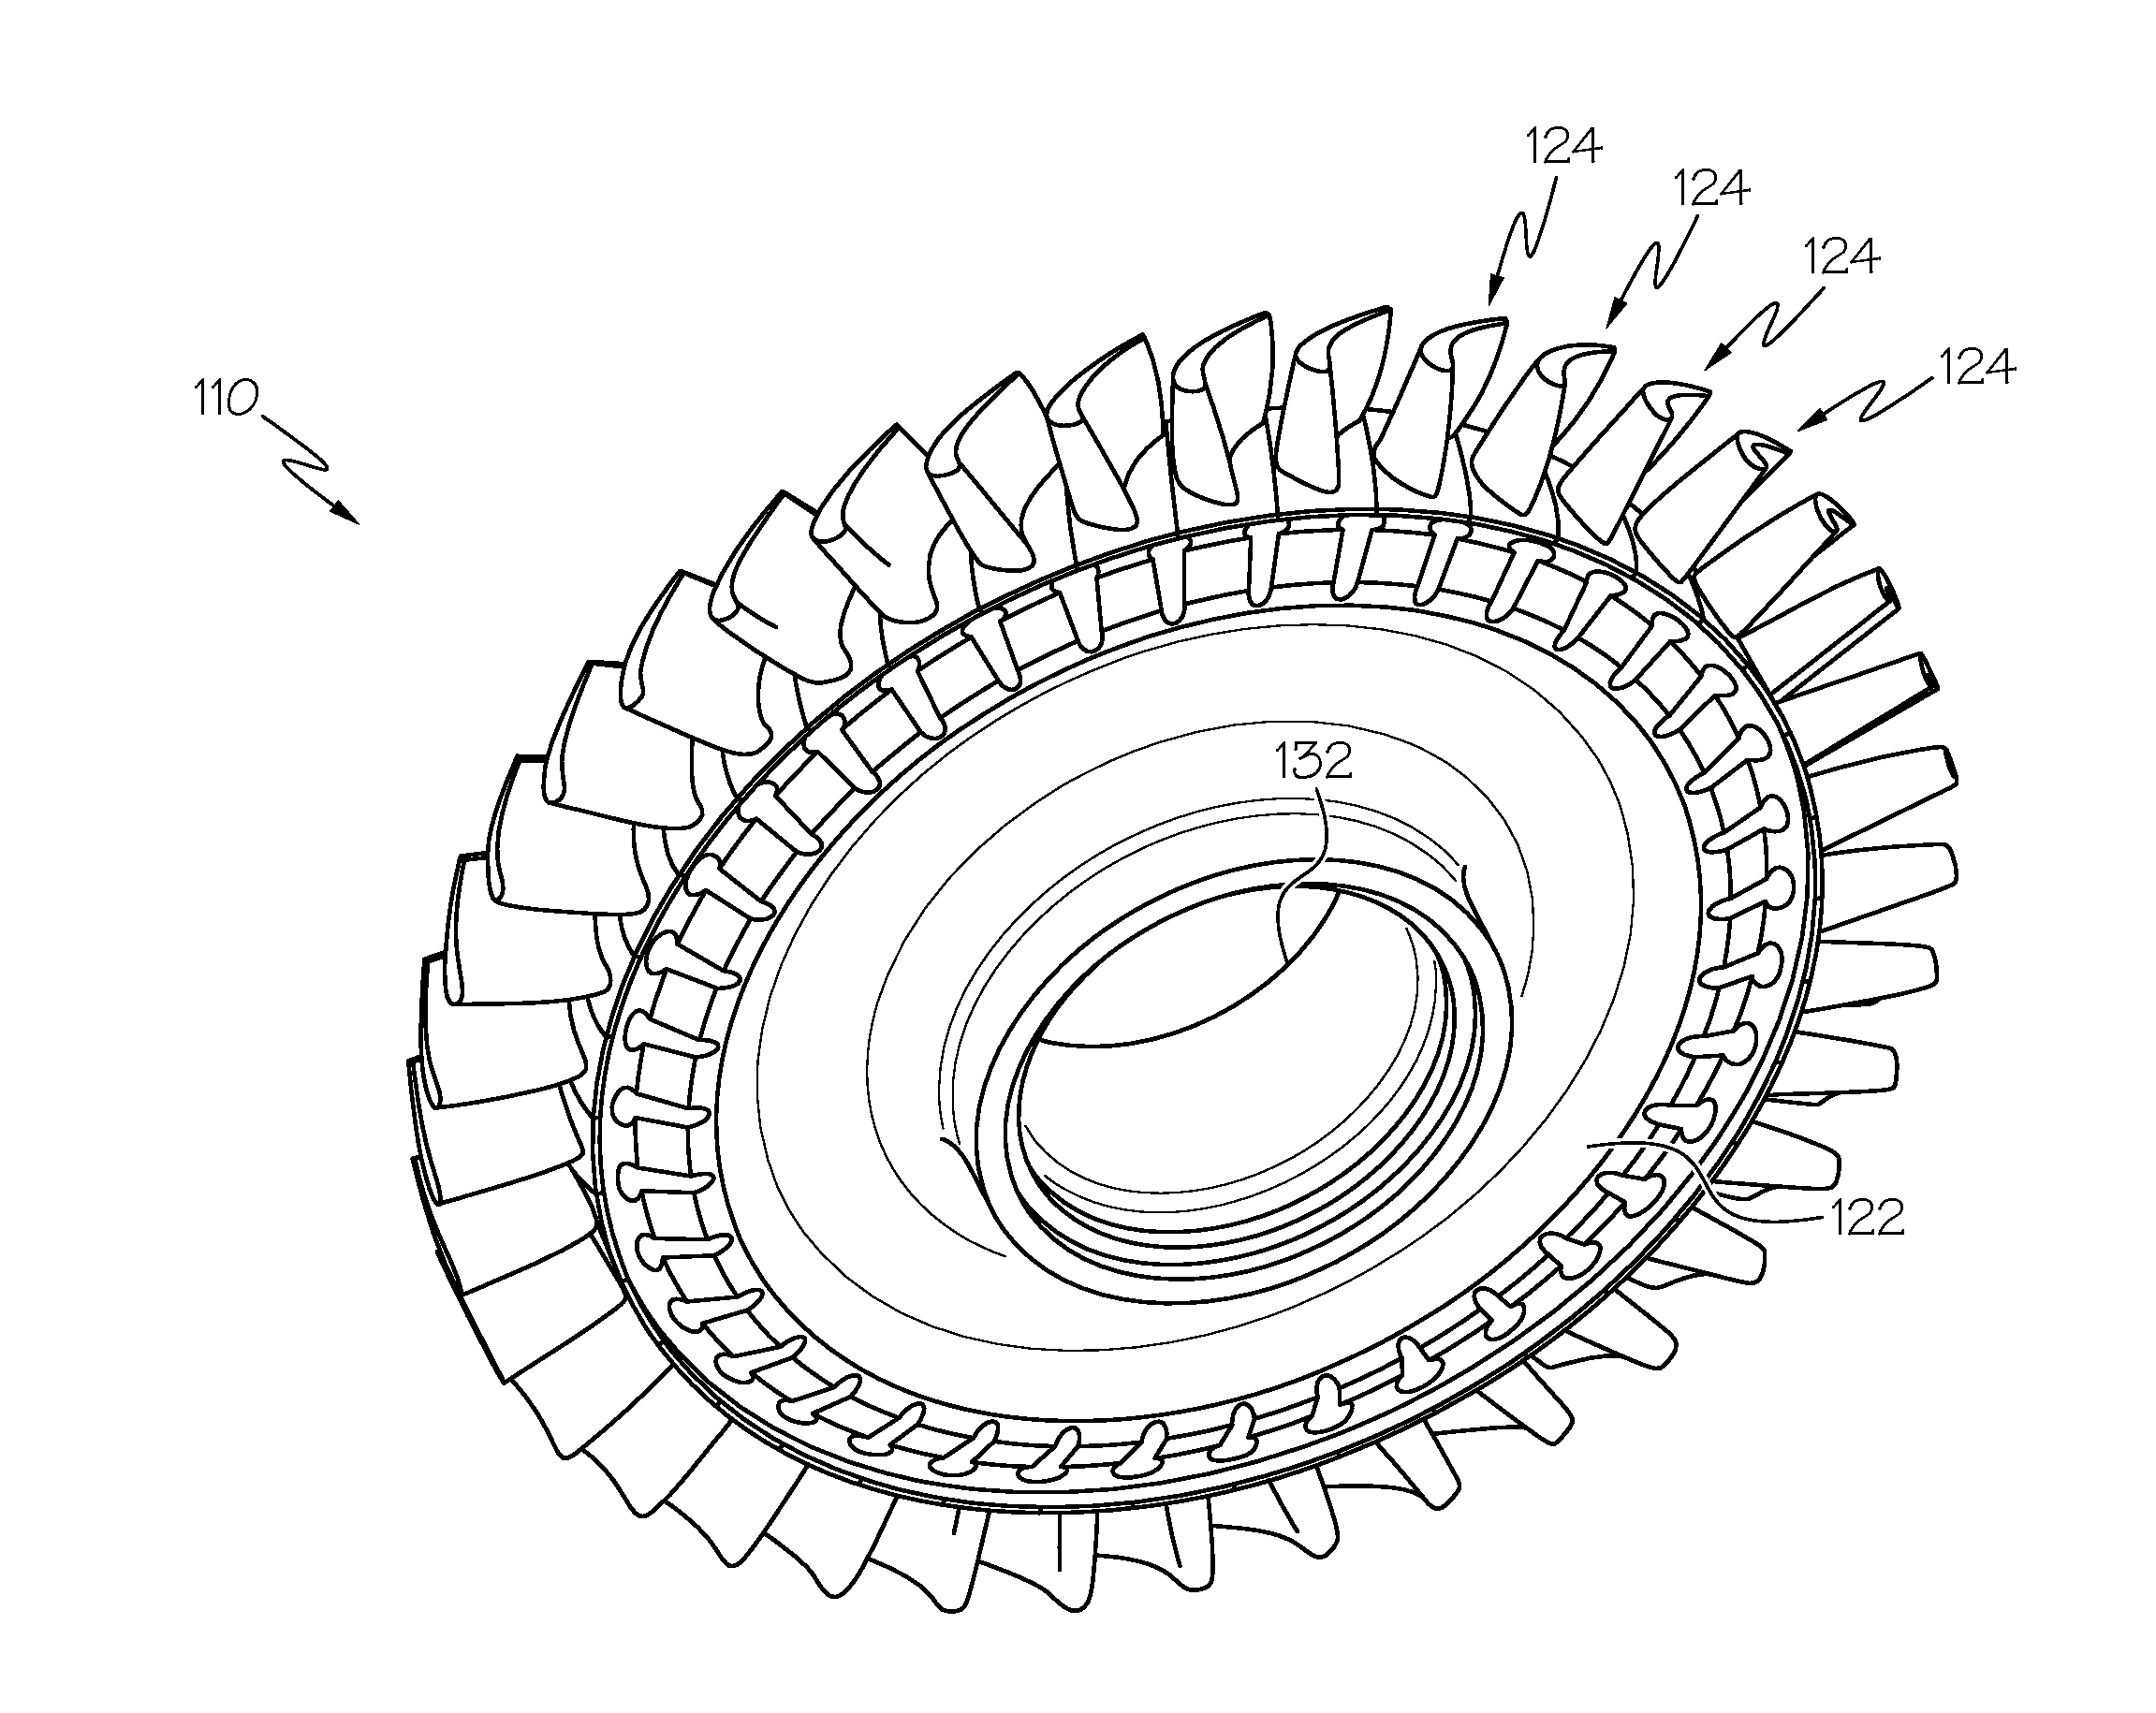 Hybrid bonded turbine rotors and methods for manufacturing the same